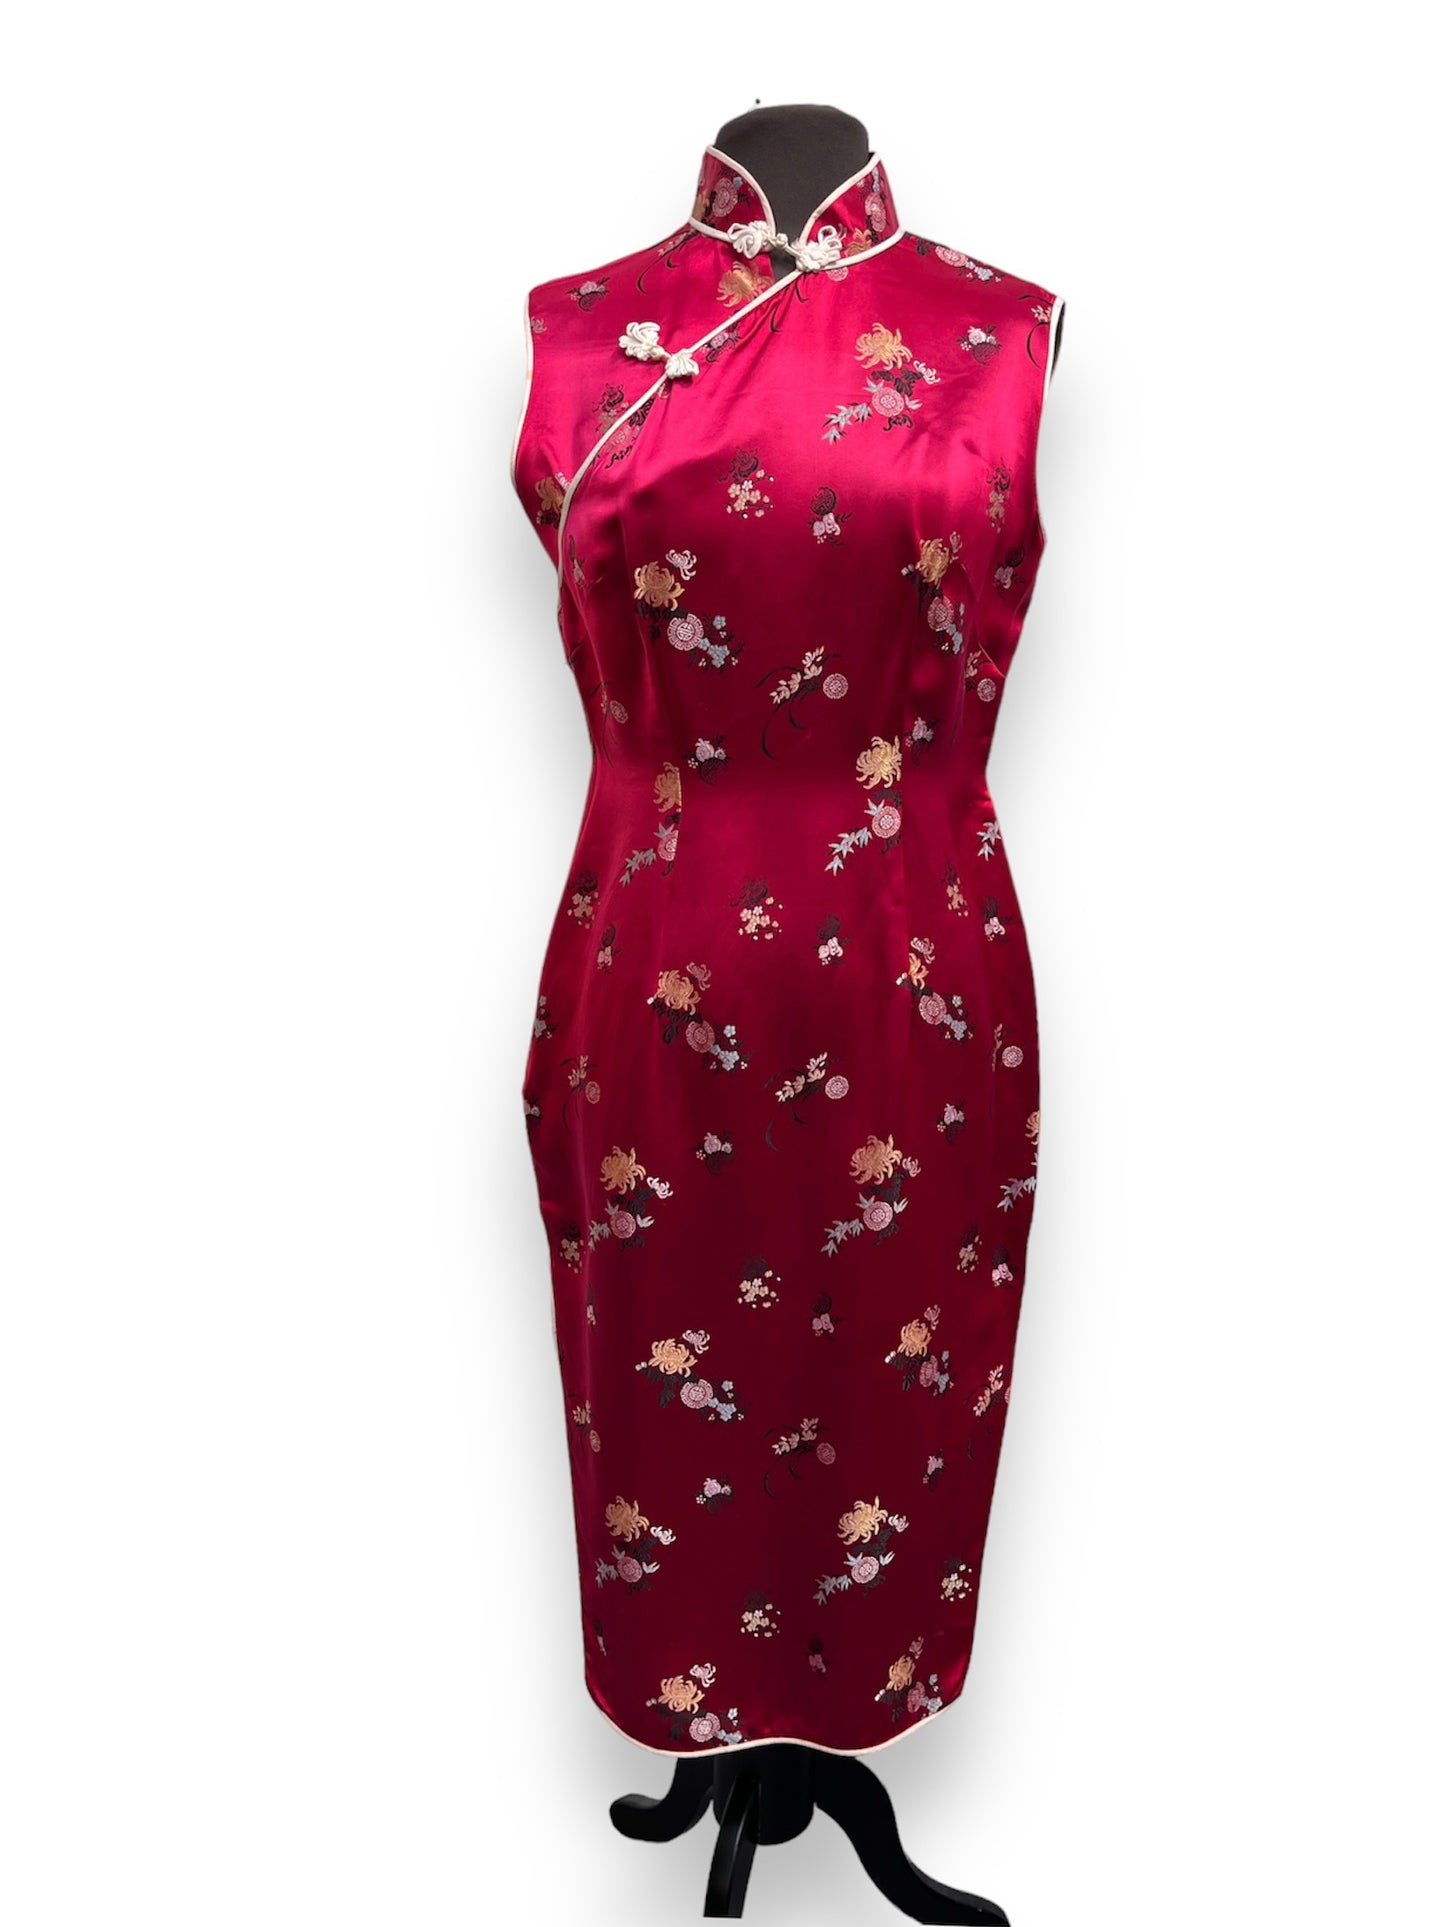 Ladies Vintage Chinese Cheongsam style Red Pink Dress